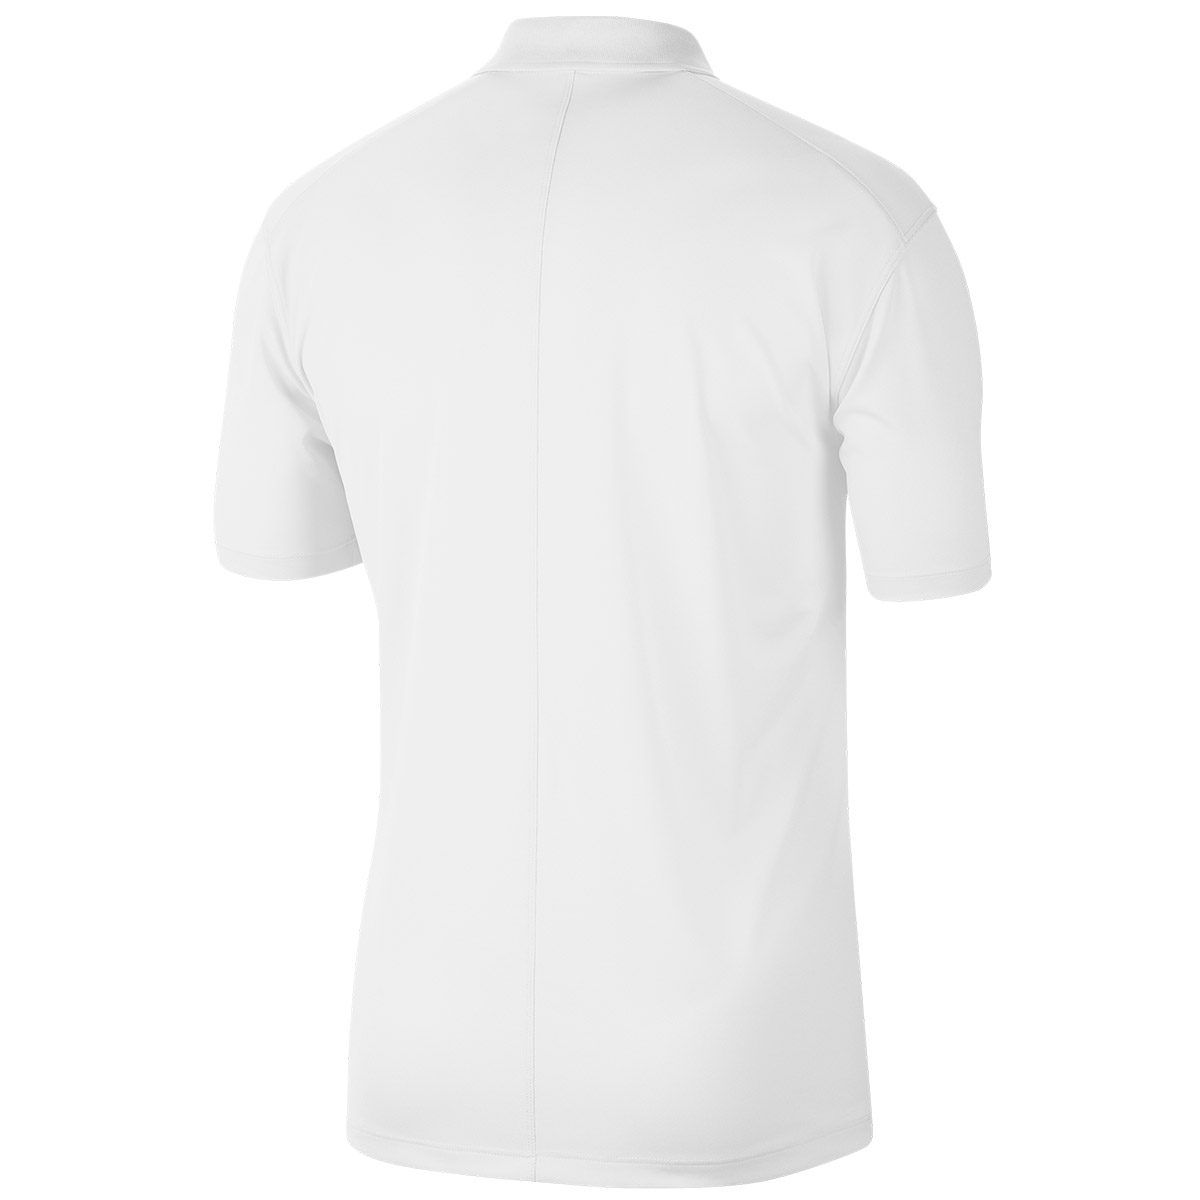 Nike Golf Dri-FIT Victory Solid Polo Shirt from american golf